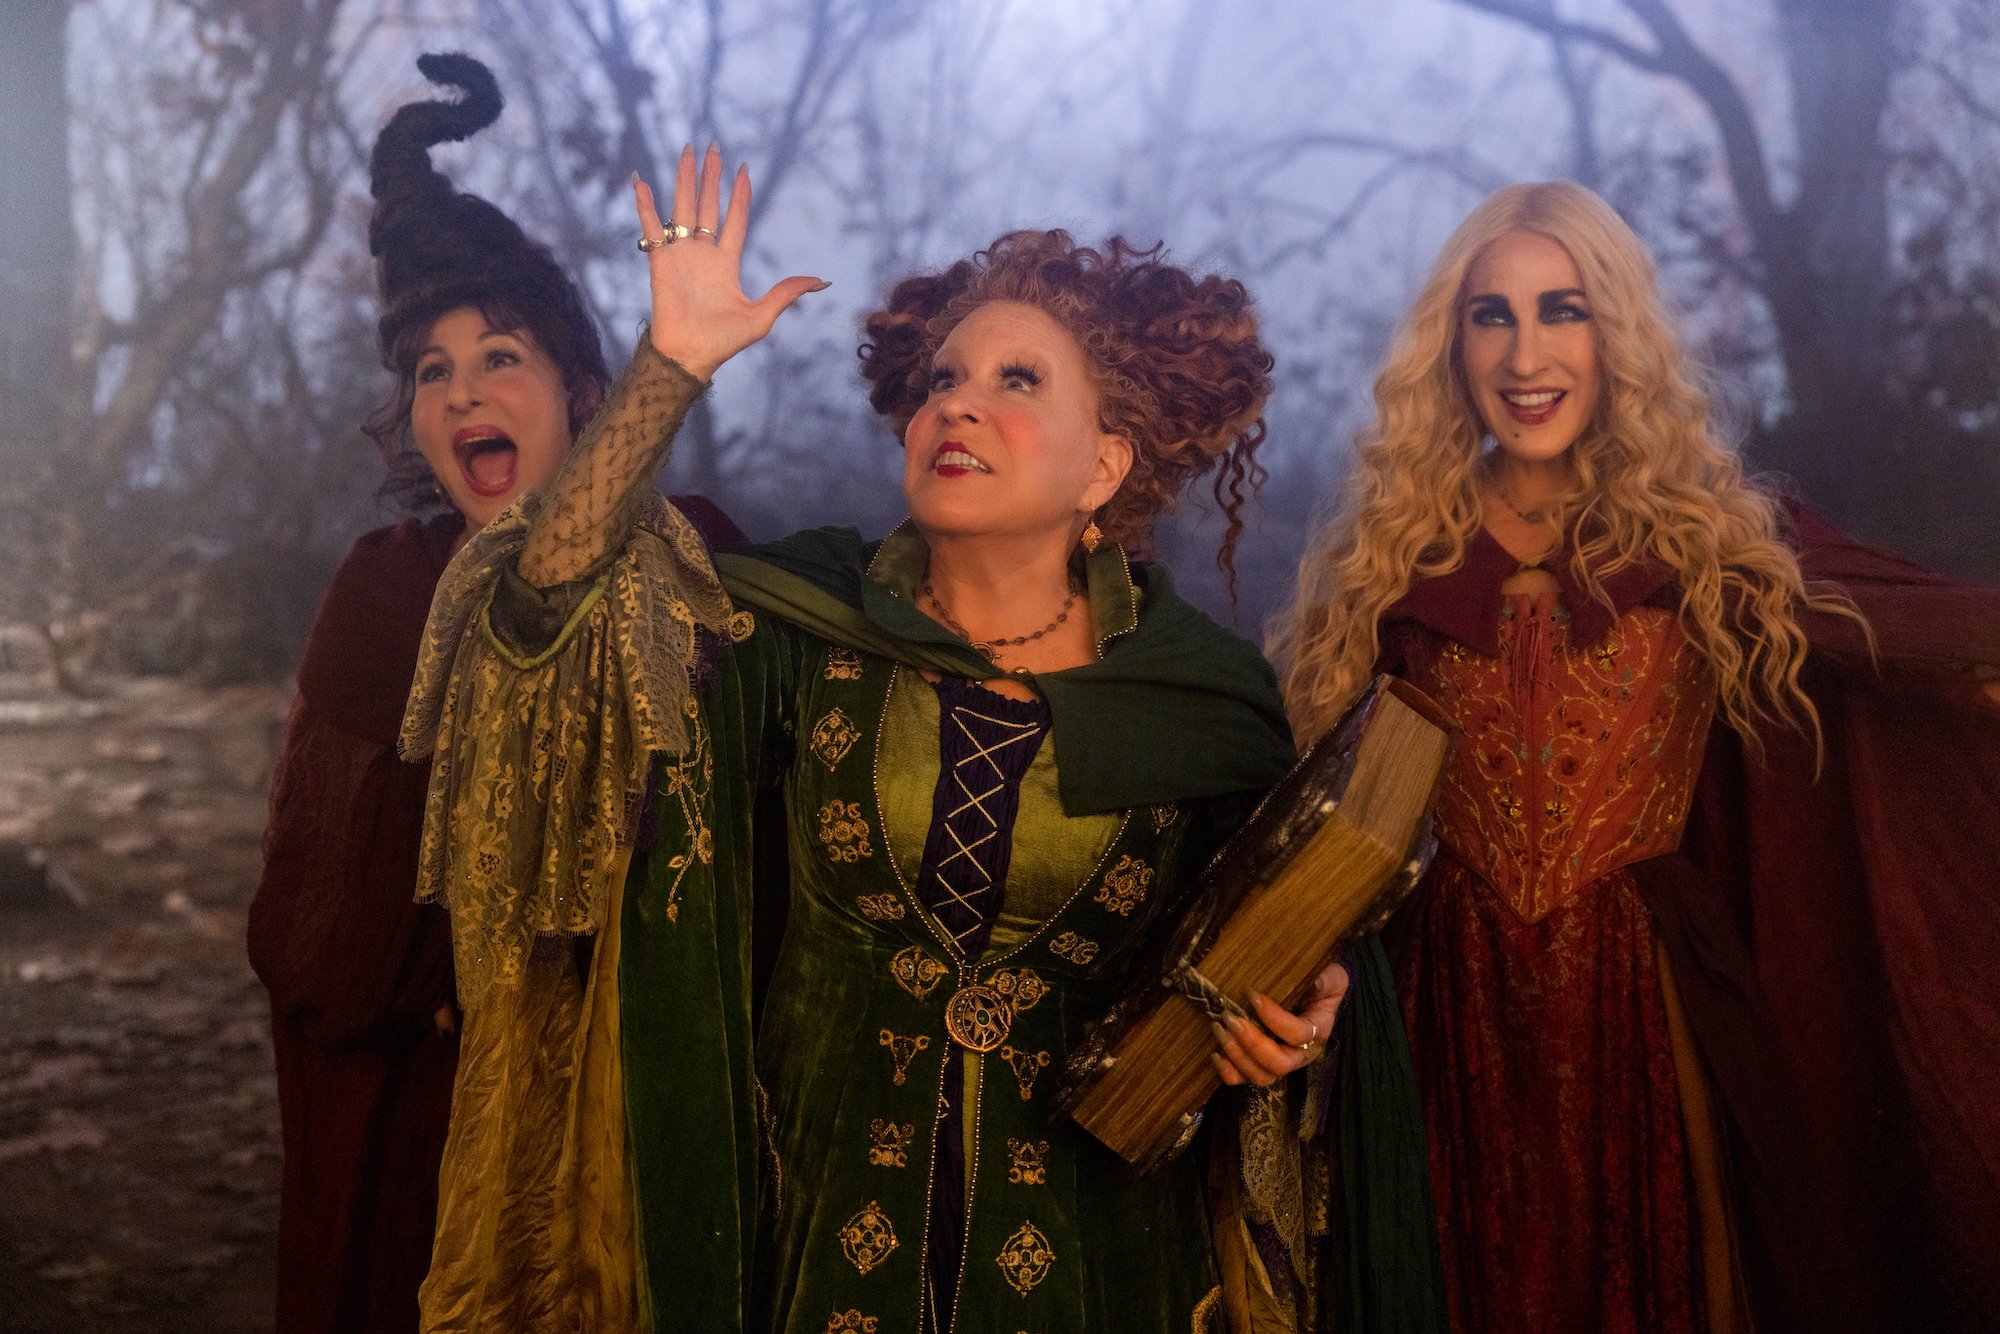 Kathy Najimy as Mary Sanderson, Bette Midler as Winifred Sanderson, and Sarah Jessica Parker as Sarah Sanderson in Disney's live-action HOCUS POCUS 2, exclusively on Disney+. Photo by Matt Kennedy. © 2022 Disney Enterprises, Inc. All Rights Reserved. Halloween movies.